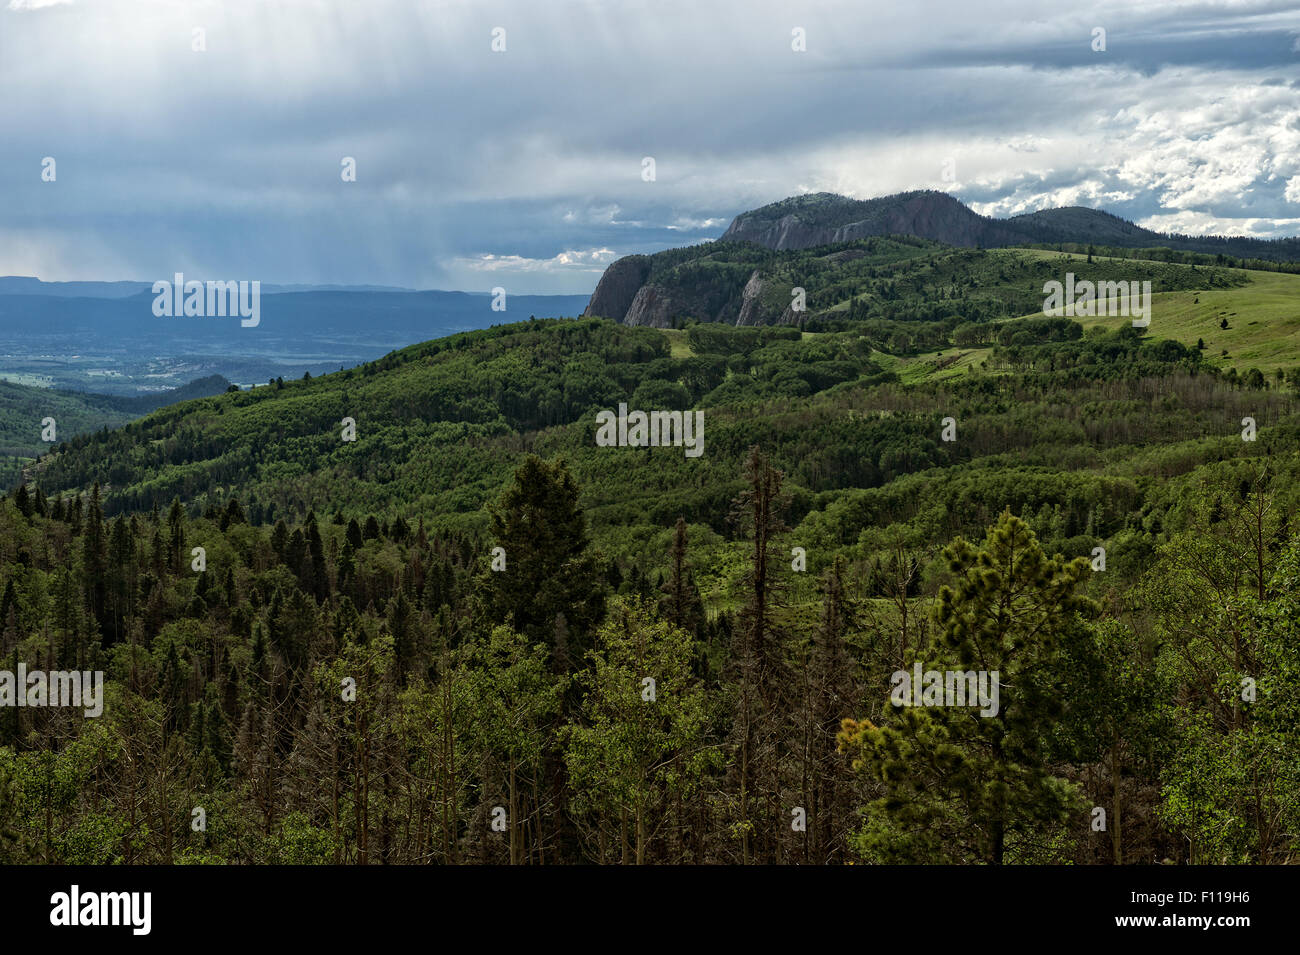 The Brazos Cliffs in northern Rio Arriba County, New Mexico, as seen from a viewpoint on US Highway 64. Stock Photo